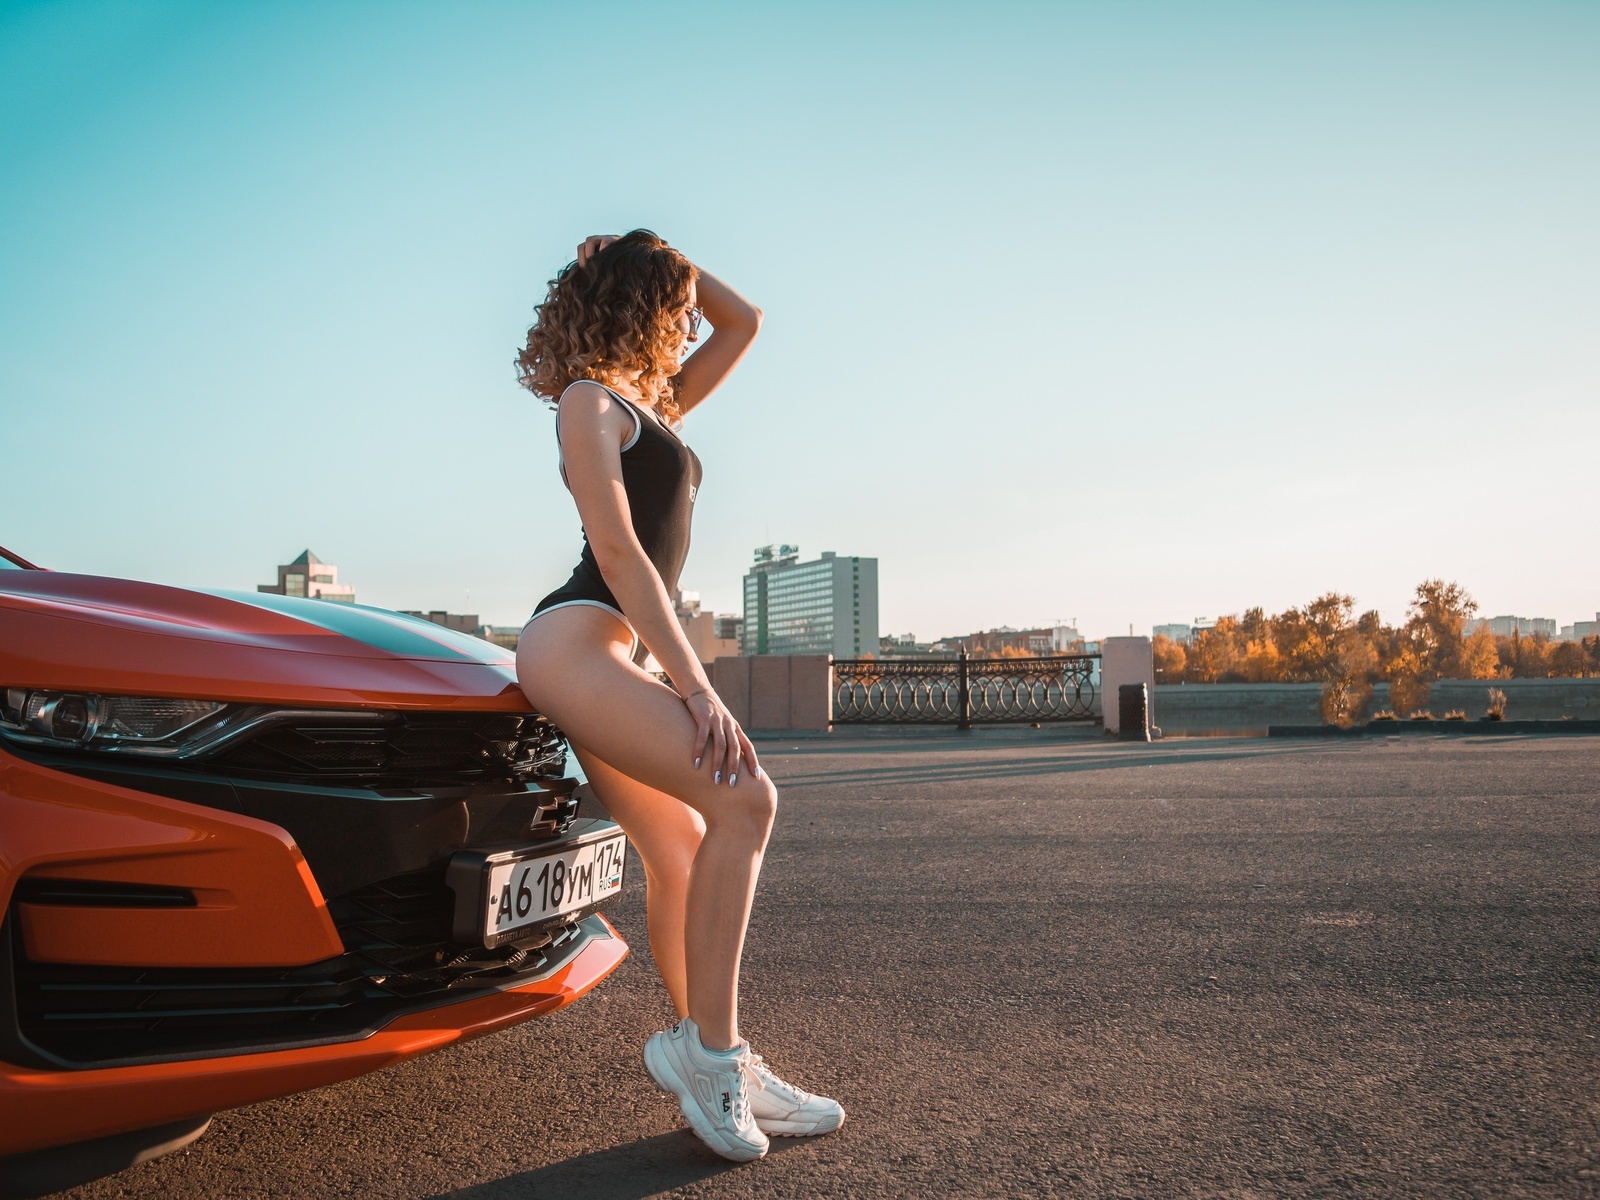 women, women with cars, ass, sneakers, fila, bodysuit, curly hair, women with glasses, sky, building, women outdoors, chevrolet